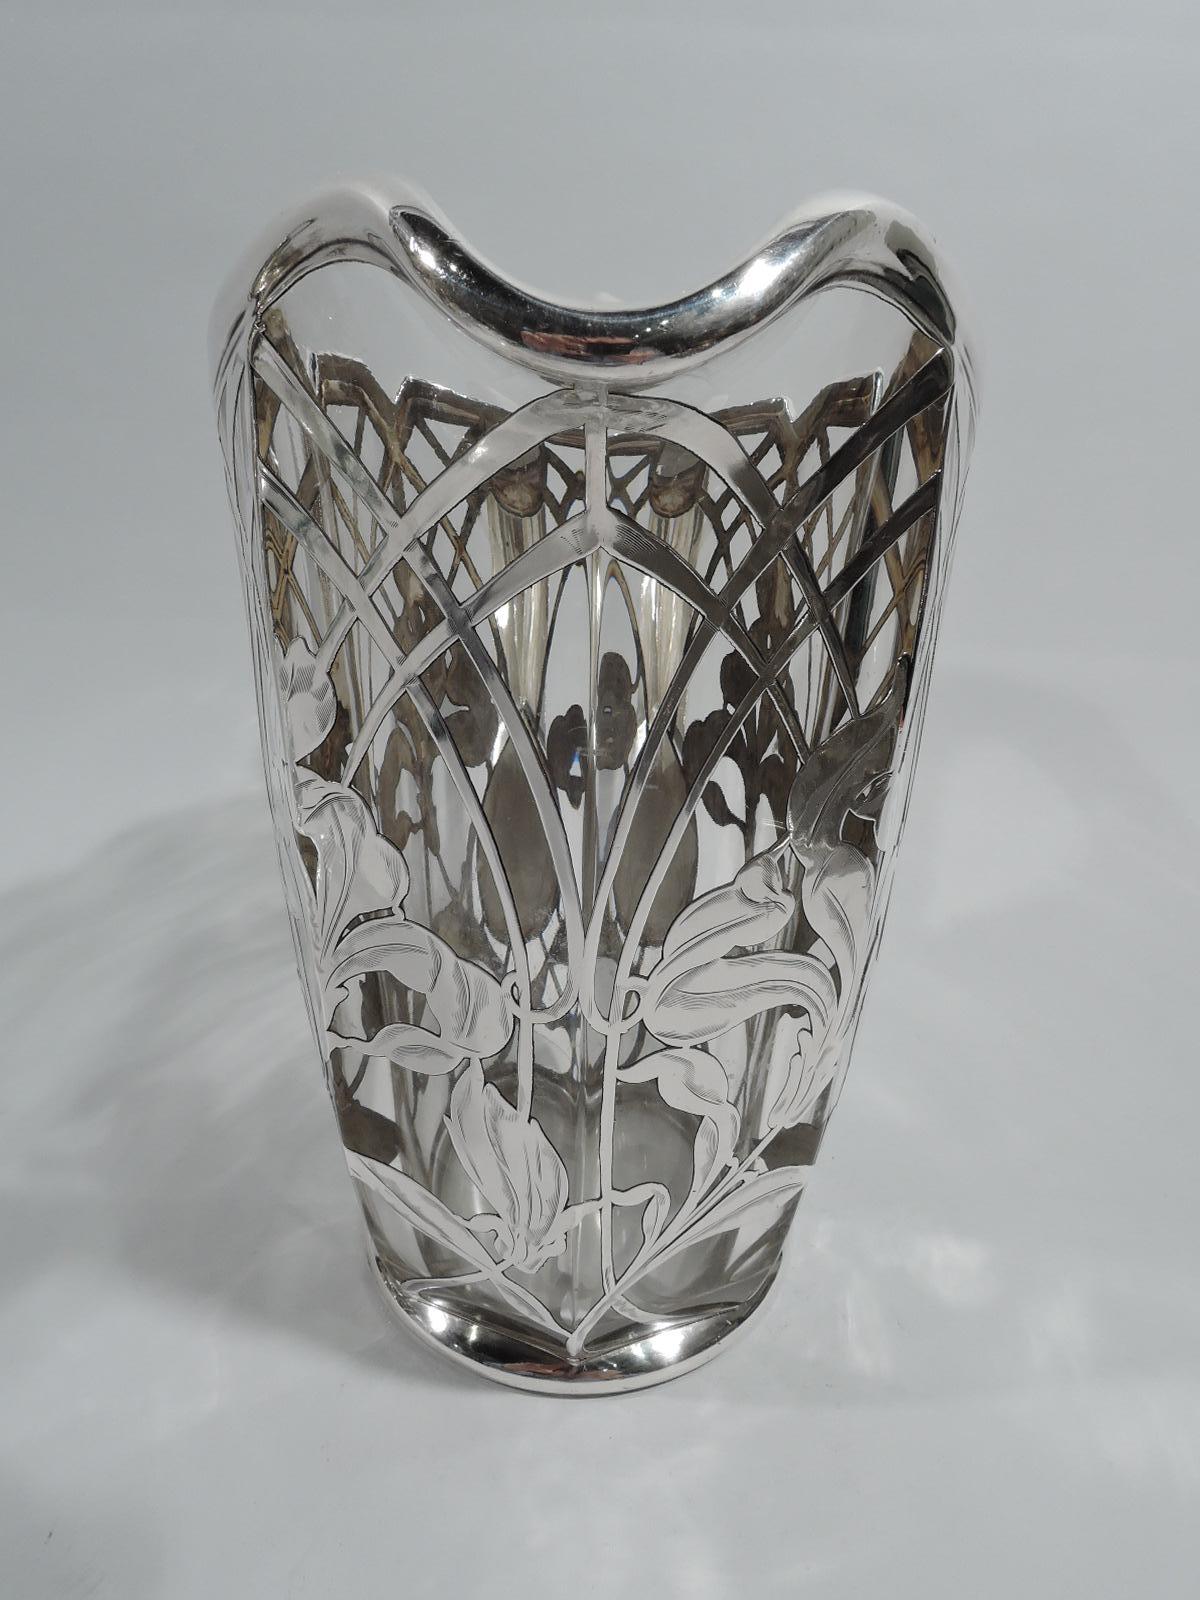 Large glass turn-of-the-century American Art Nouveau water pitcher with engraved silver overlay. Faceted clear glass body with asymmetrical and castellated helmet mouth. Silver overlay in form of trellis arcade inset with loose and fluid irises.